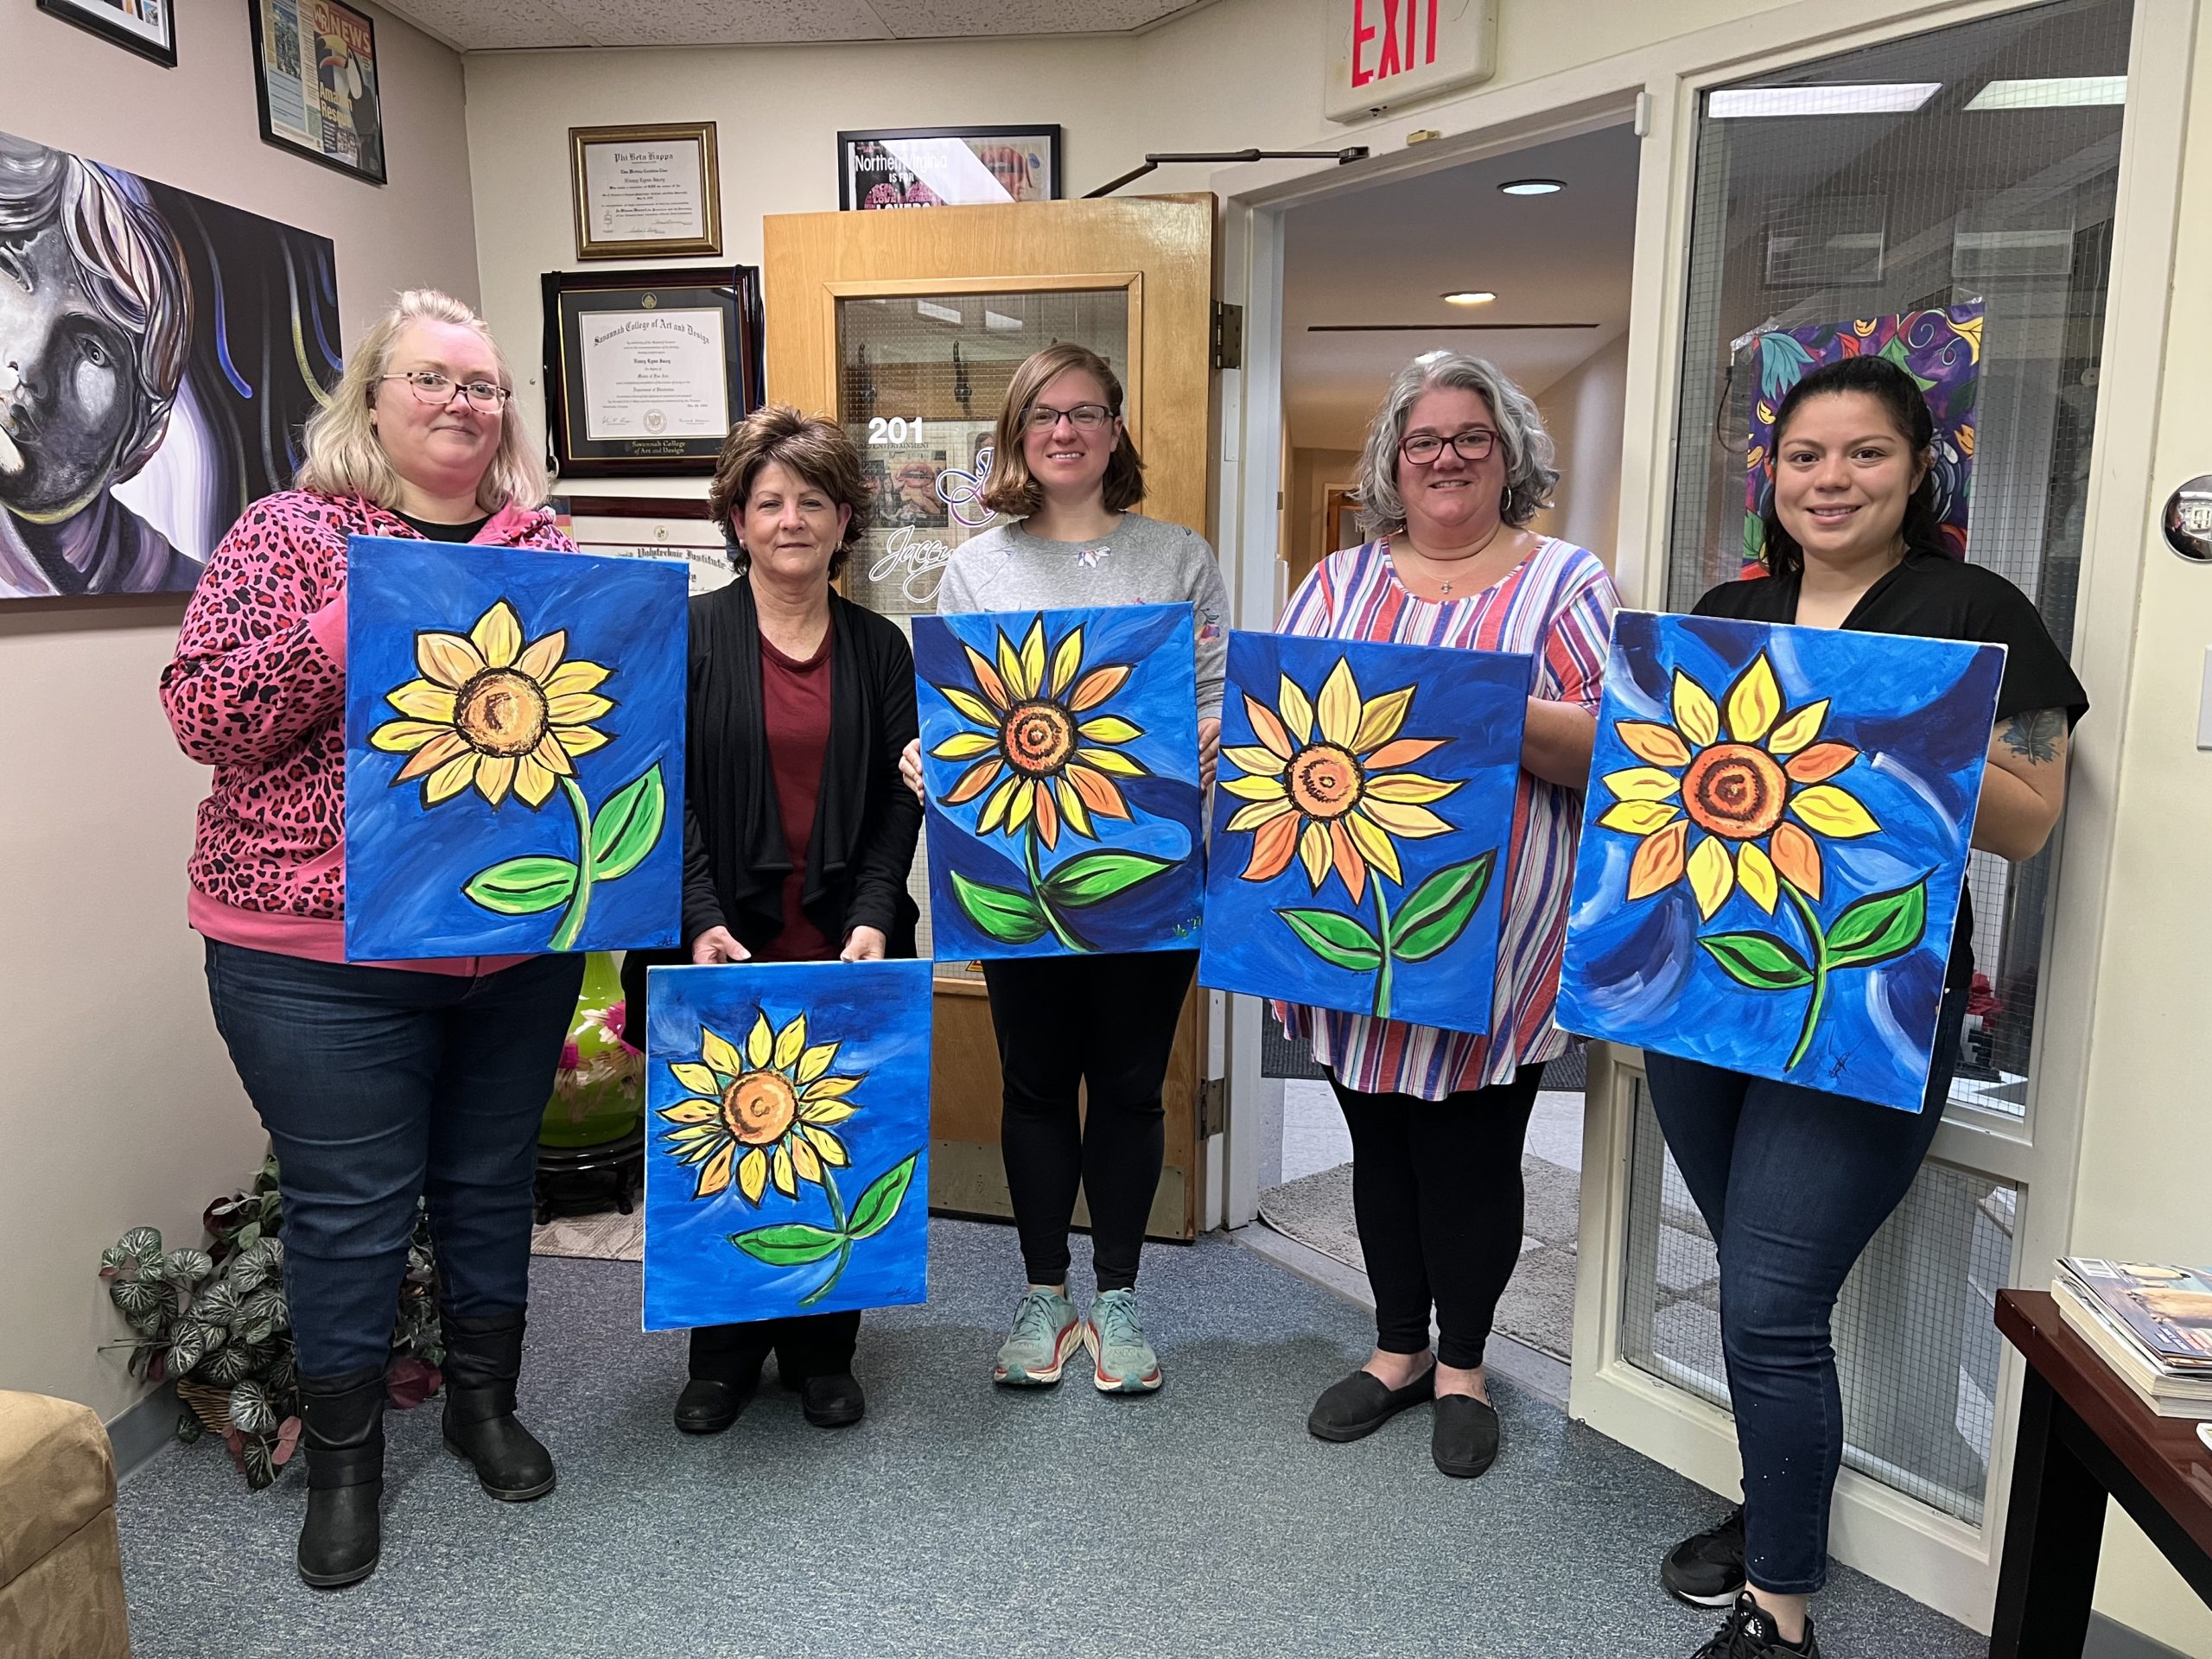 Five women standing together each one is holding a painting they did of a sunflower